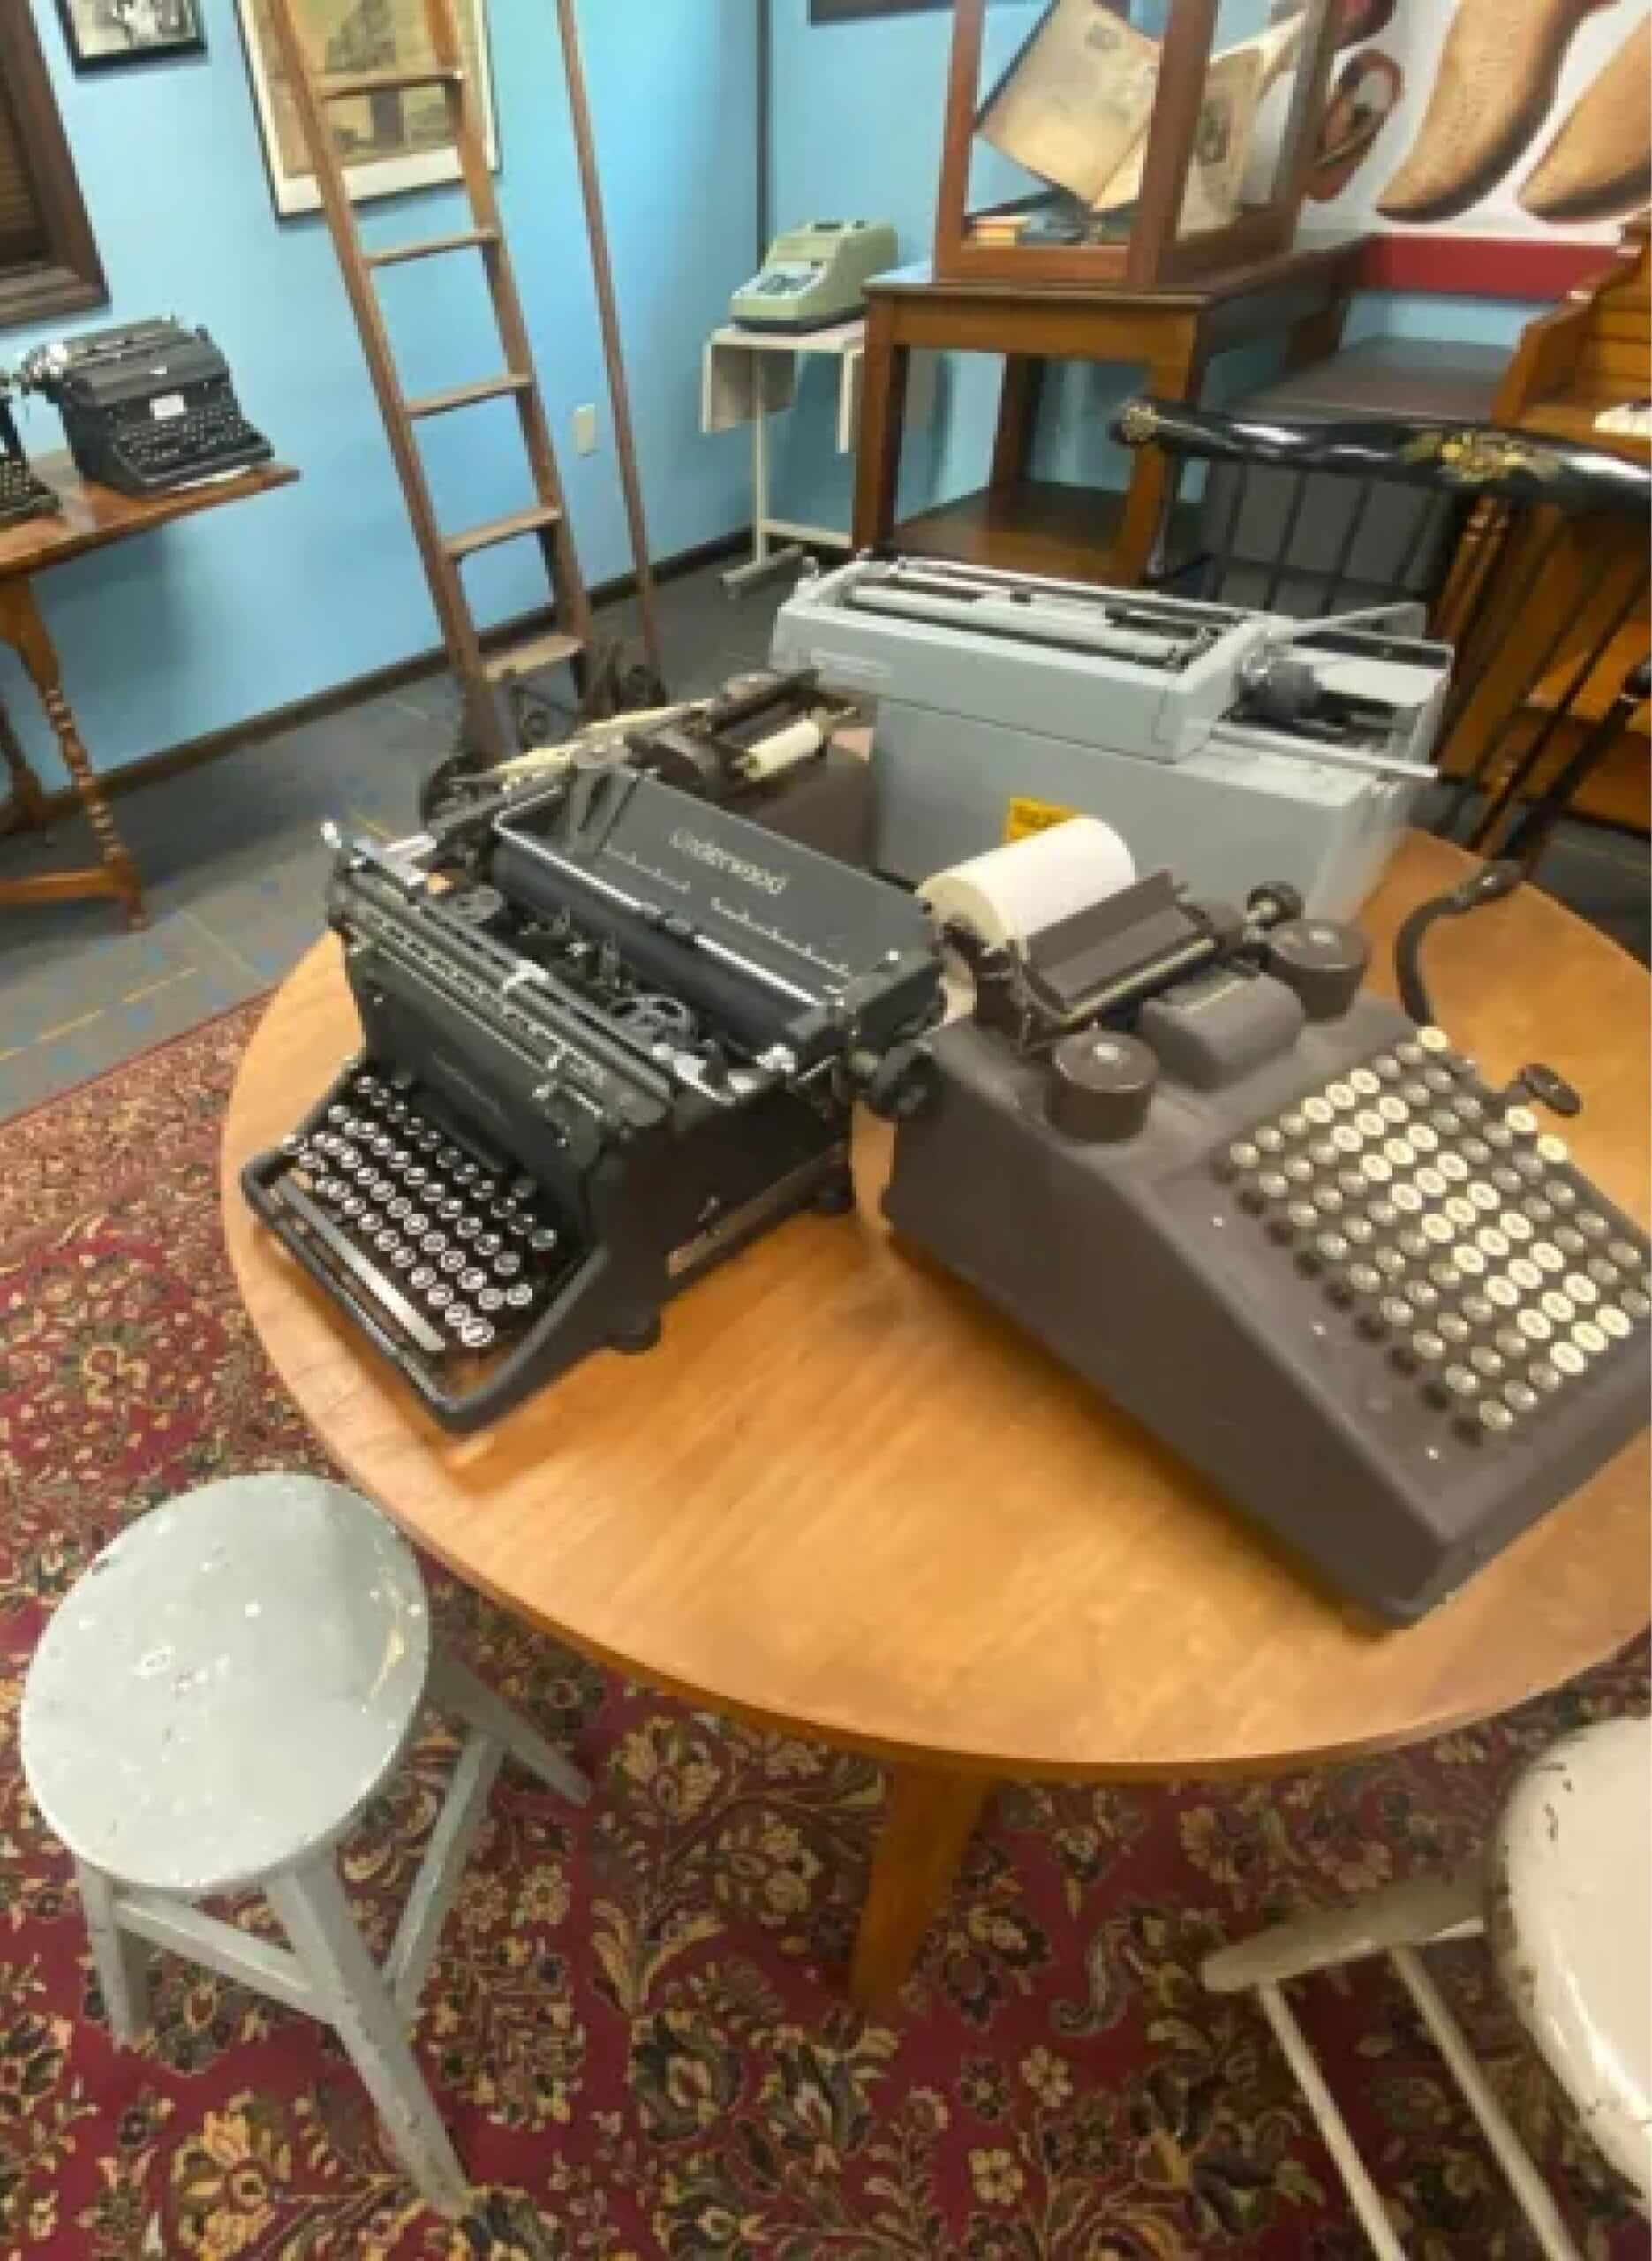 Check out classic typewriters at the Walter Elwood Museum